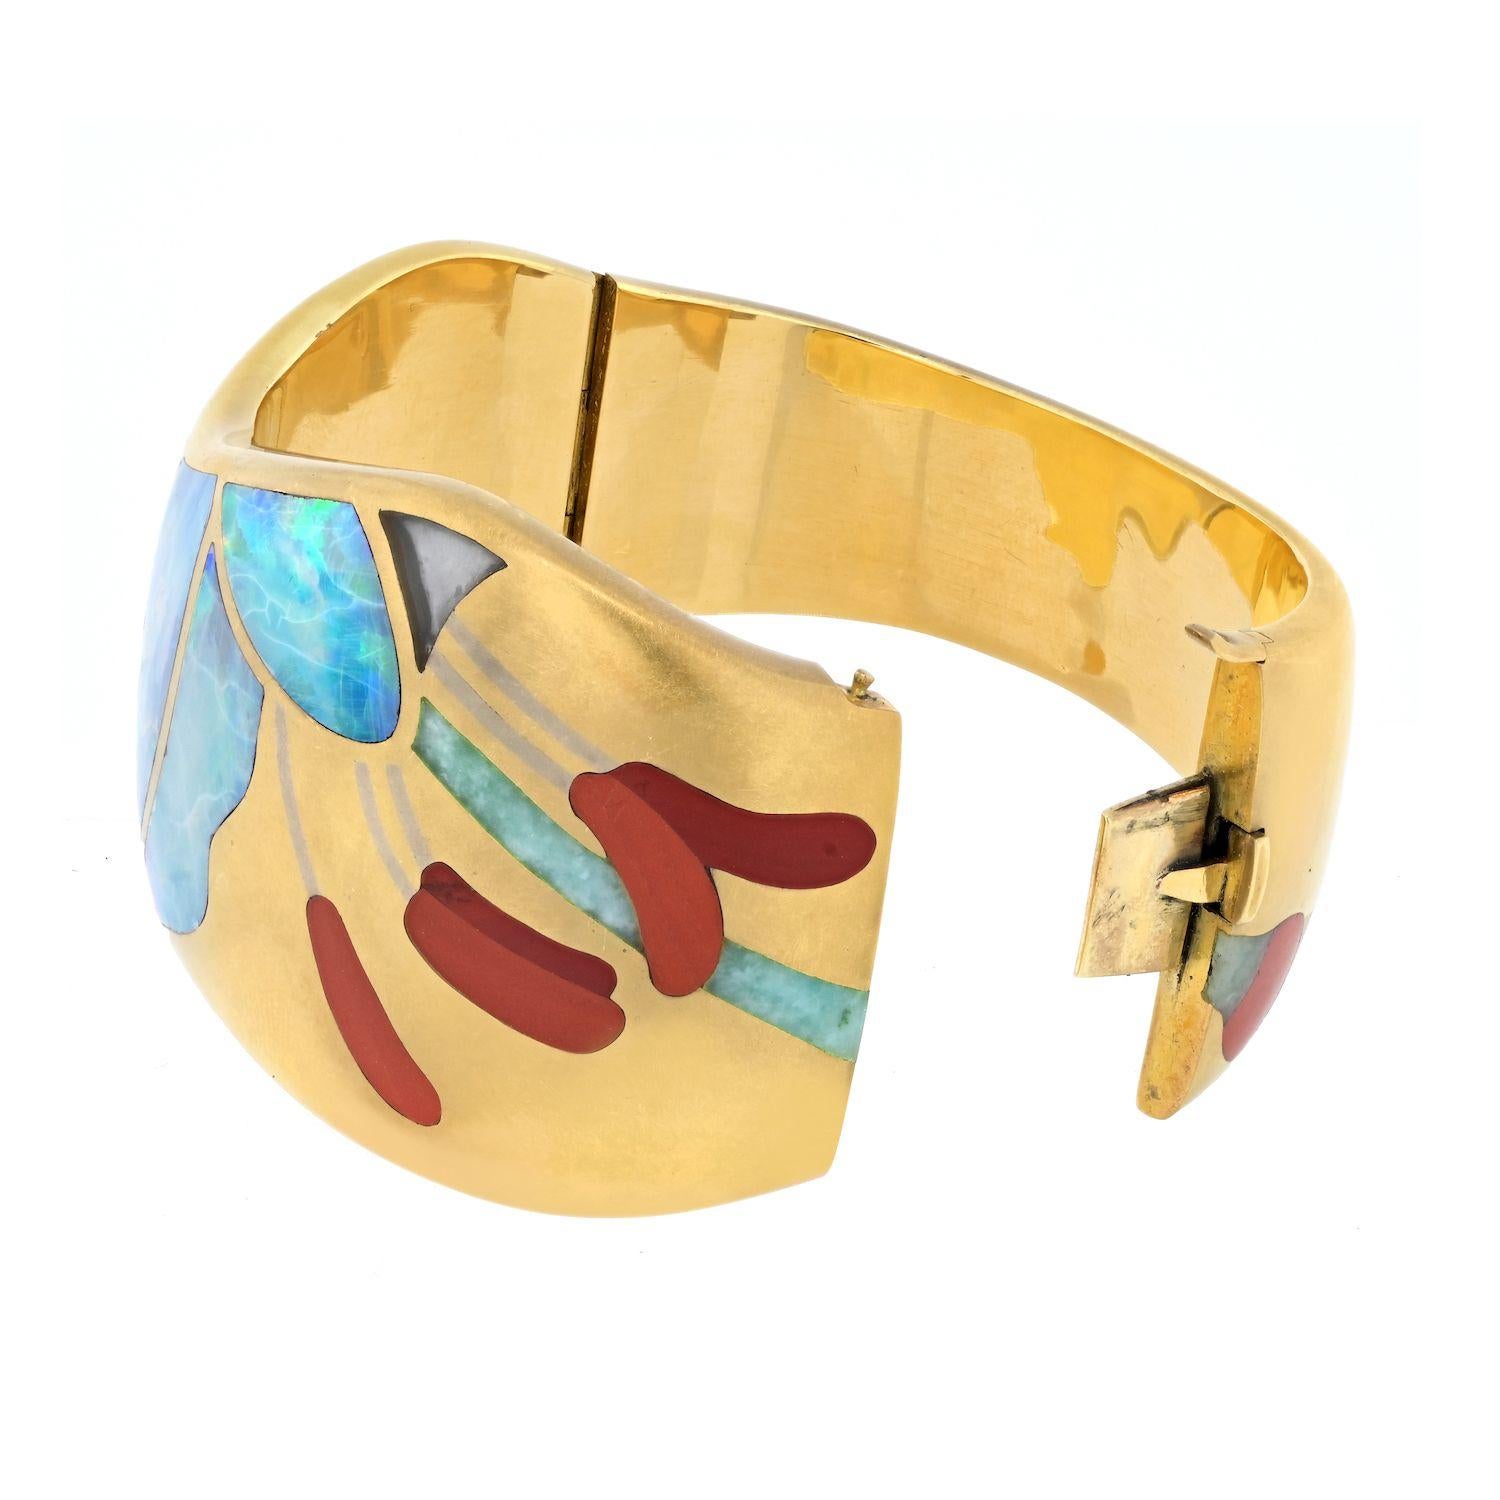 Elevate your jewelry collection with the exquisite Tiffany & Co. 18K Yellow Gold Angela Cummings Opal Bracelet. This stunning piece is a testament to Angela Cummings' exceptional artistry, showcasing inlaid opal, carnelian, rock crystal, and green